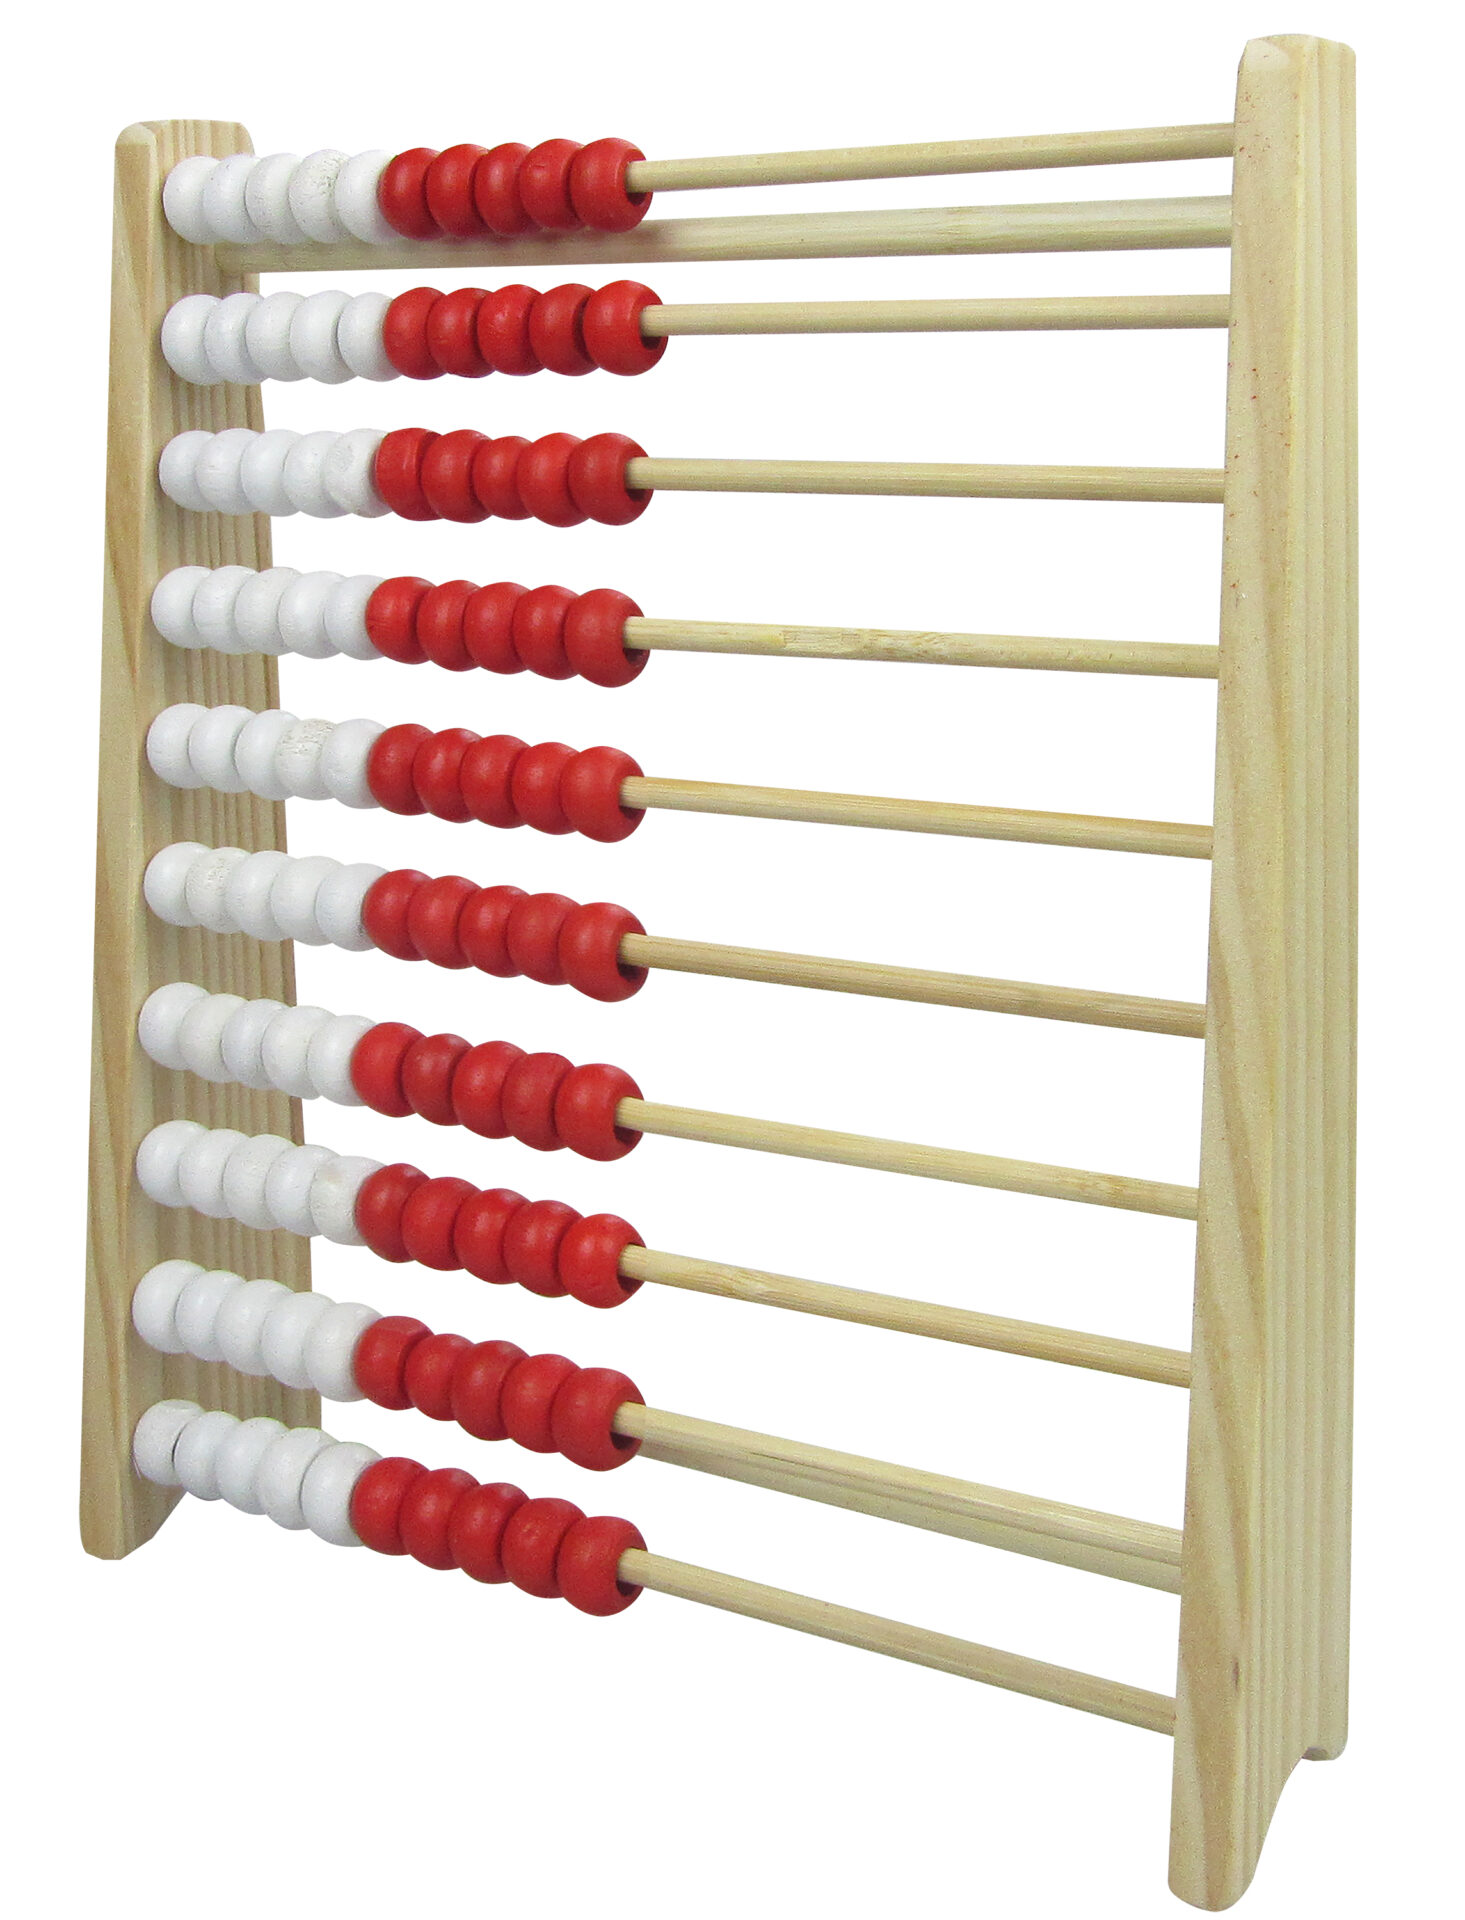 learner abacus with 10 rows containing 100 read and white beads